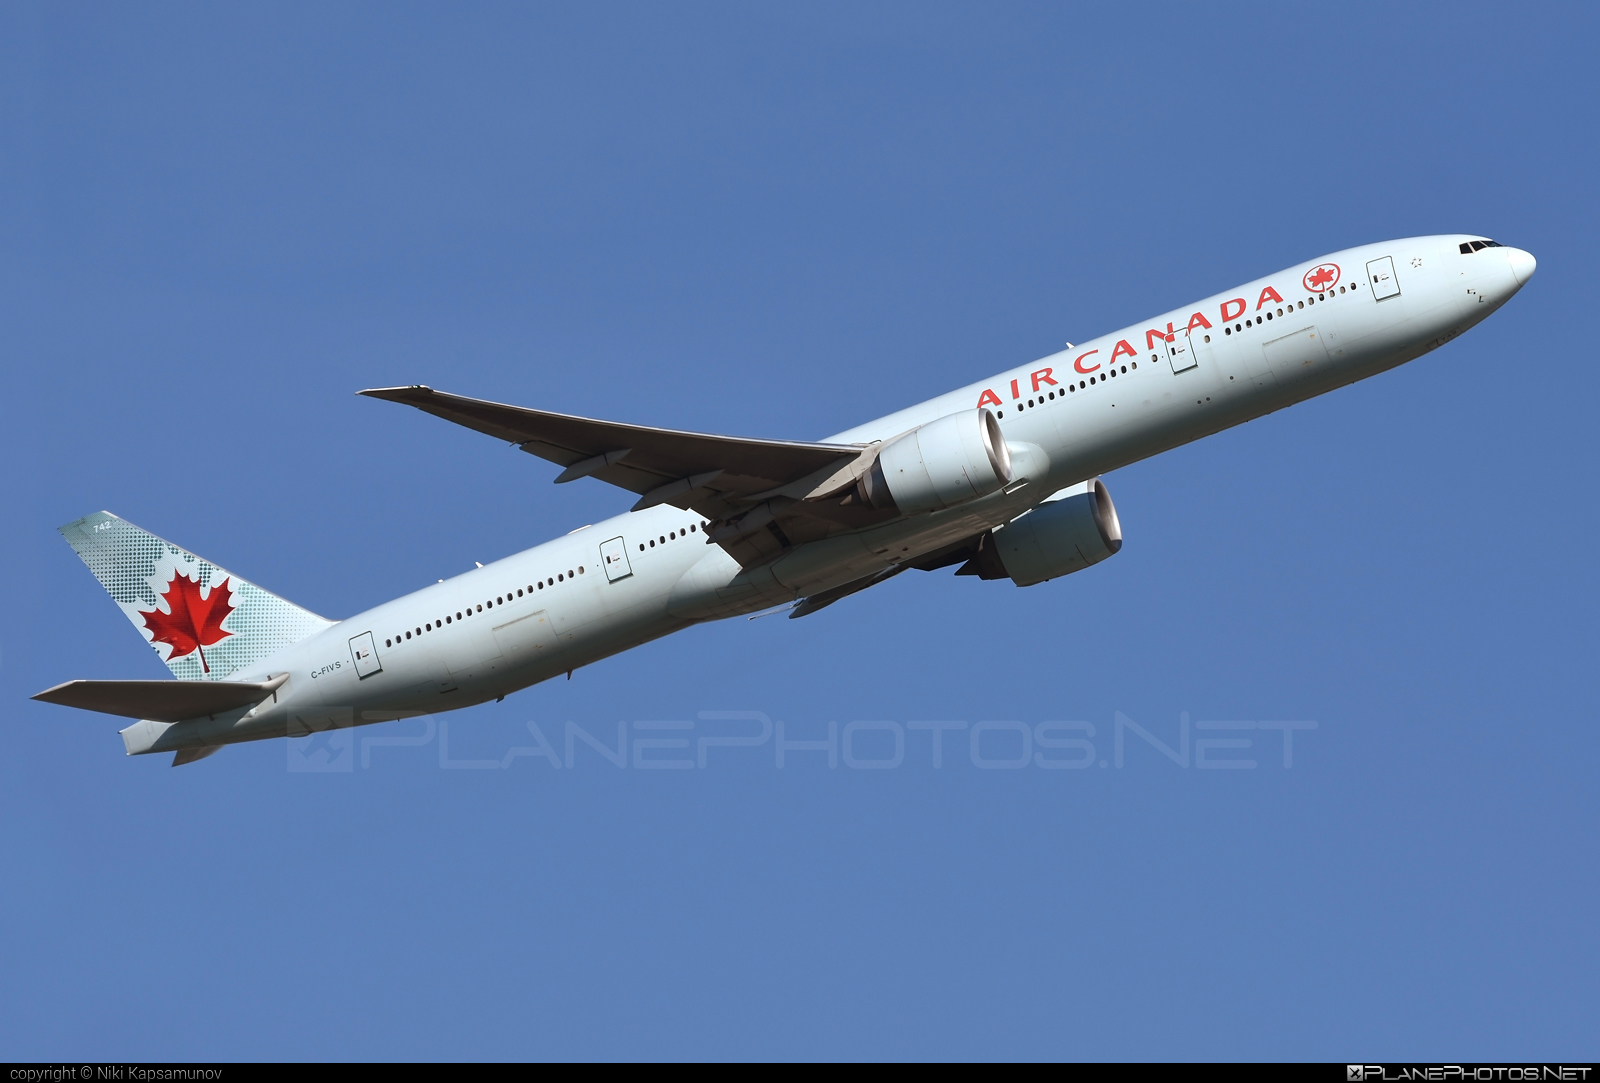 Boeing 777-300ER - C-FIVS operated by Air Canada #airCanada #b777 #b777er #boeing #boeing777 #tripleseven